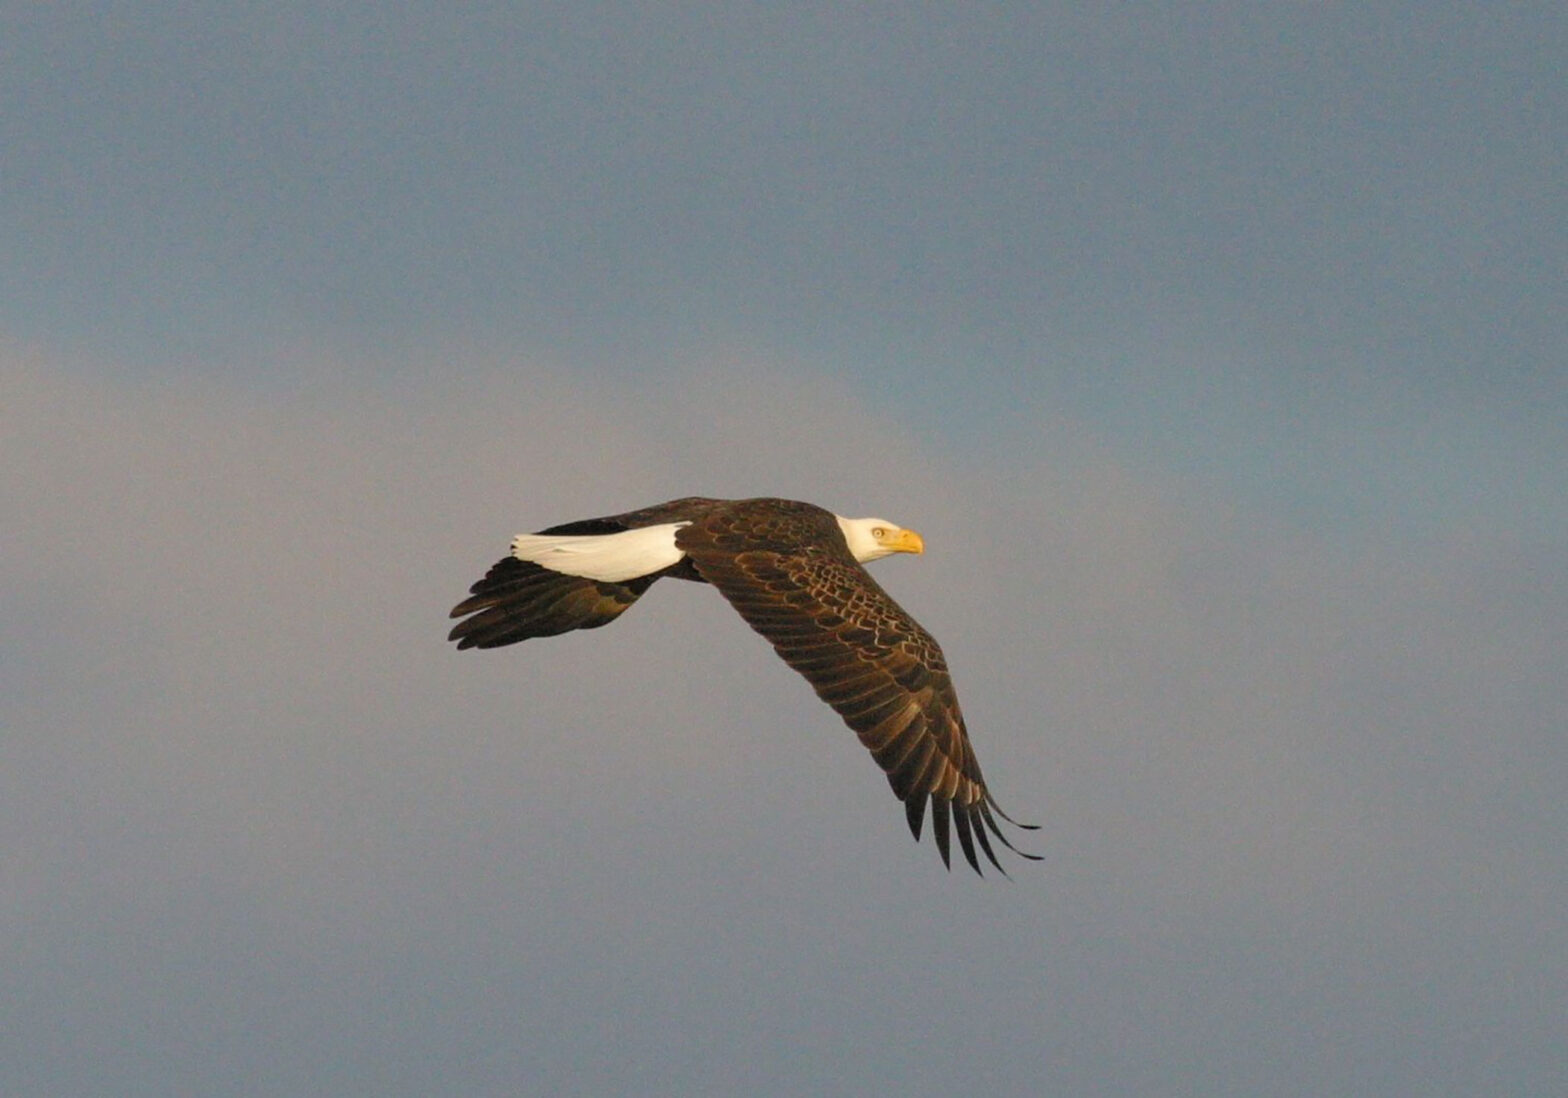 Eagle soaring with it wings pointing downward